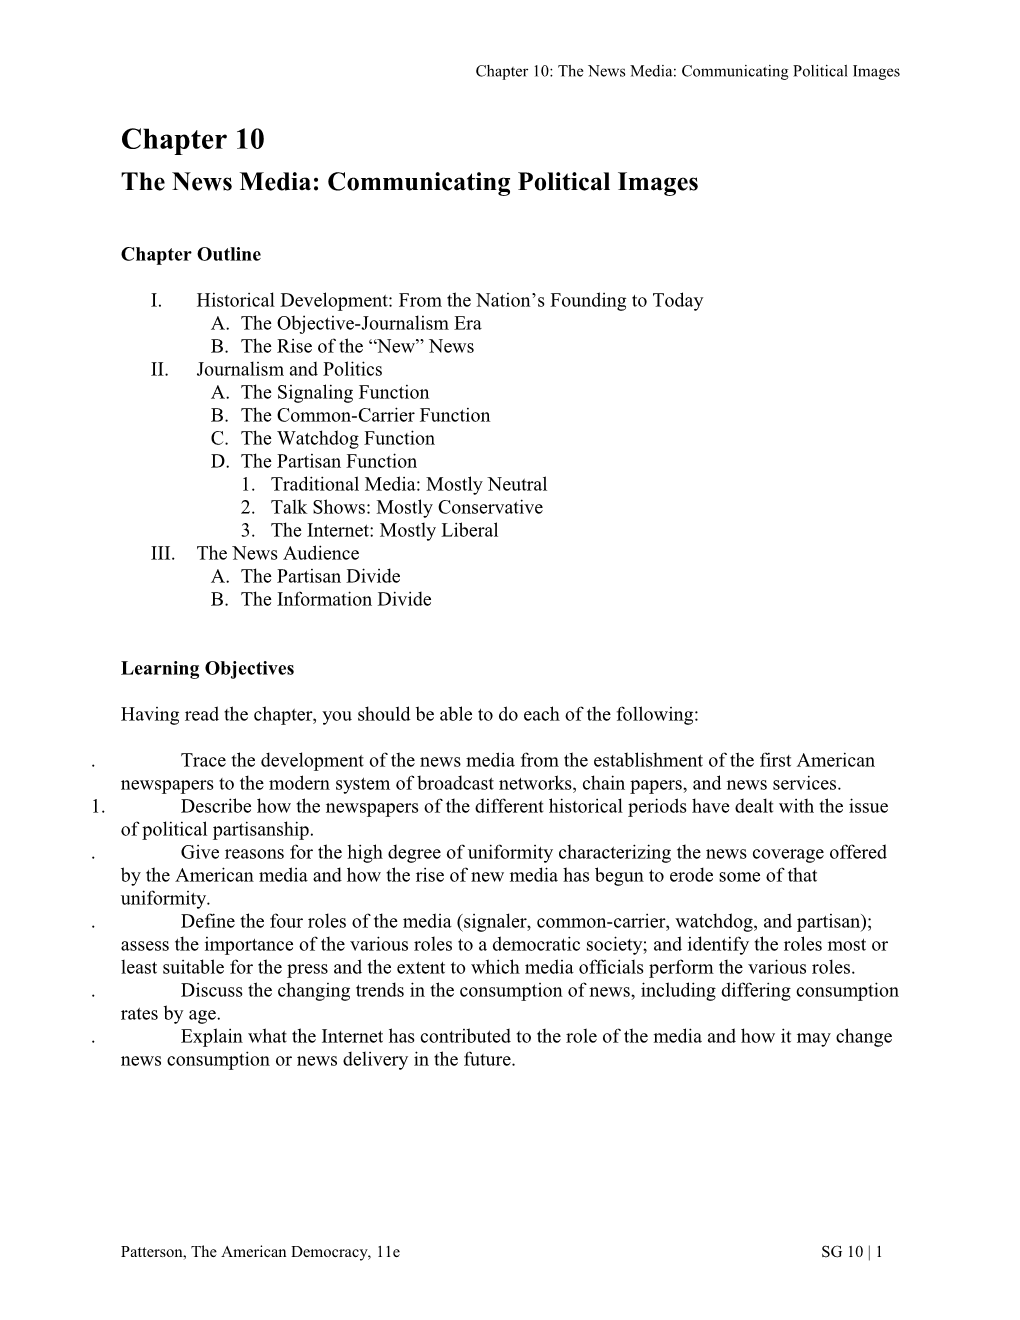 Chapter 10: the News Media: Communicating Political Images